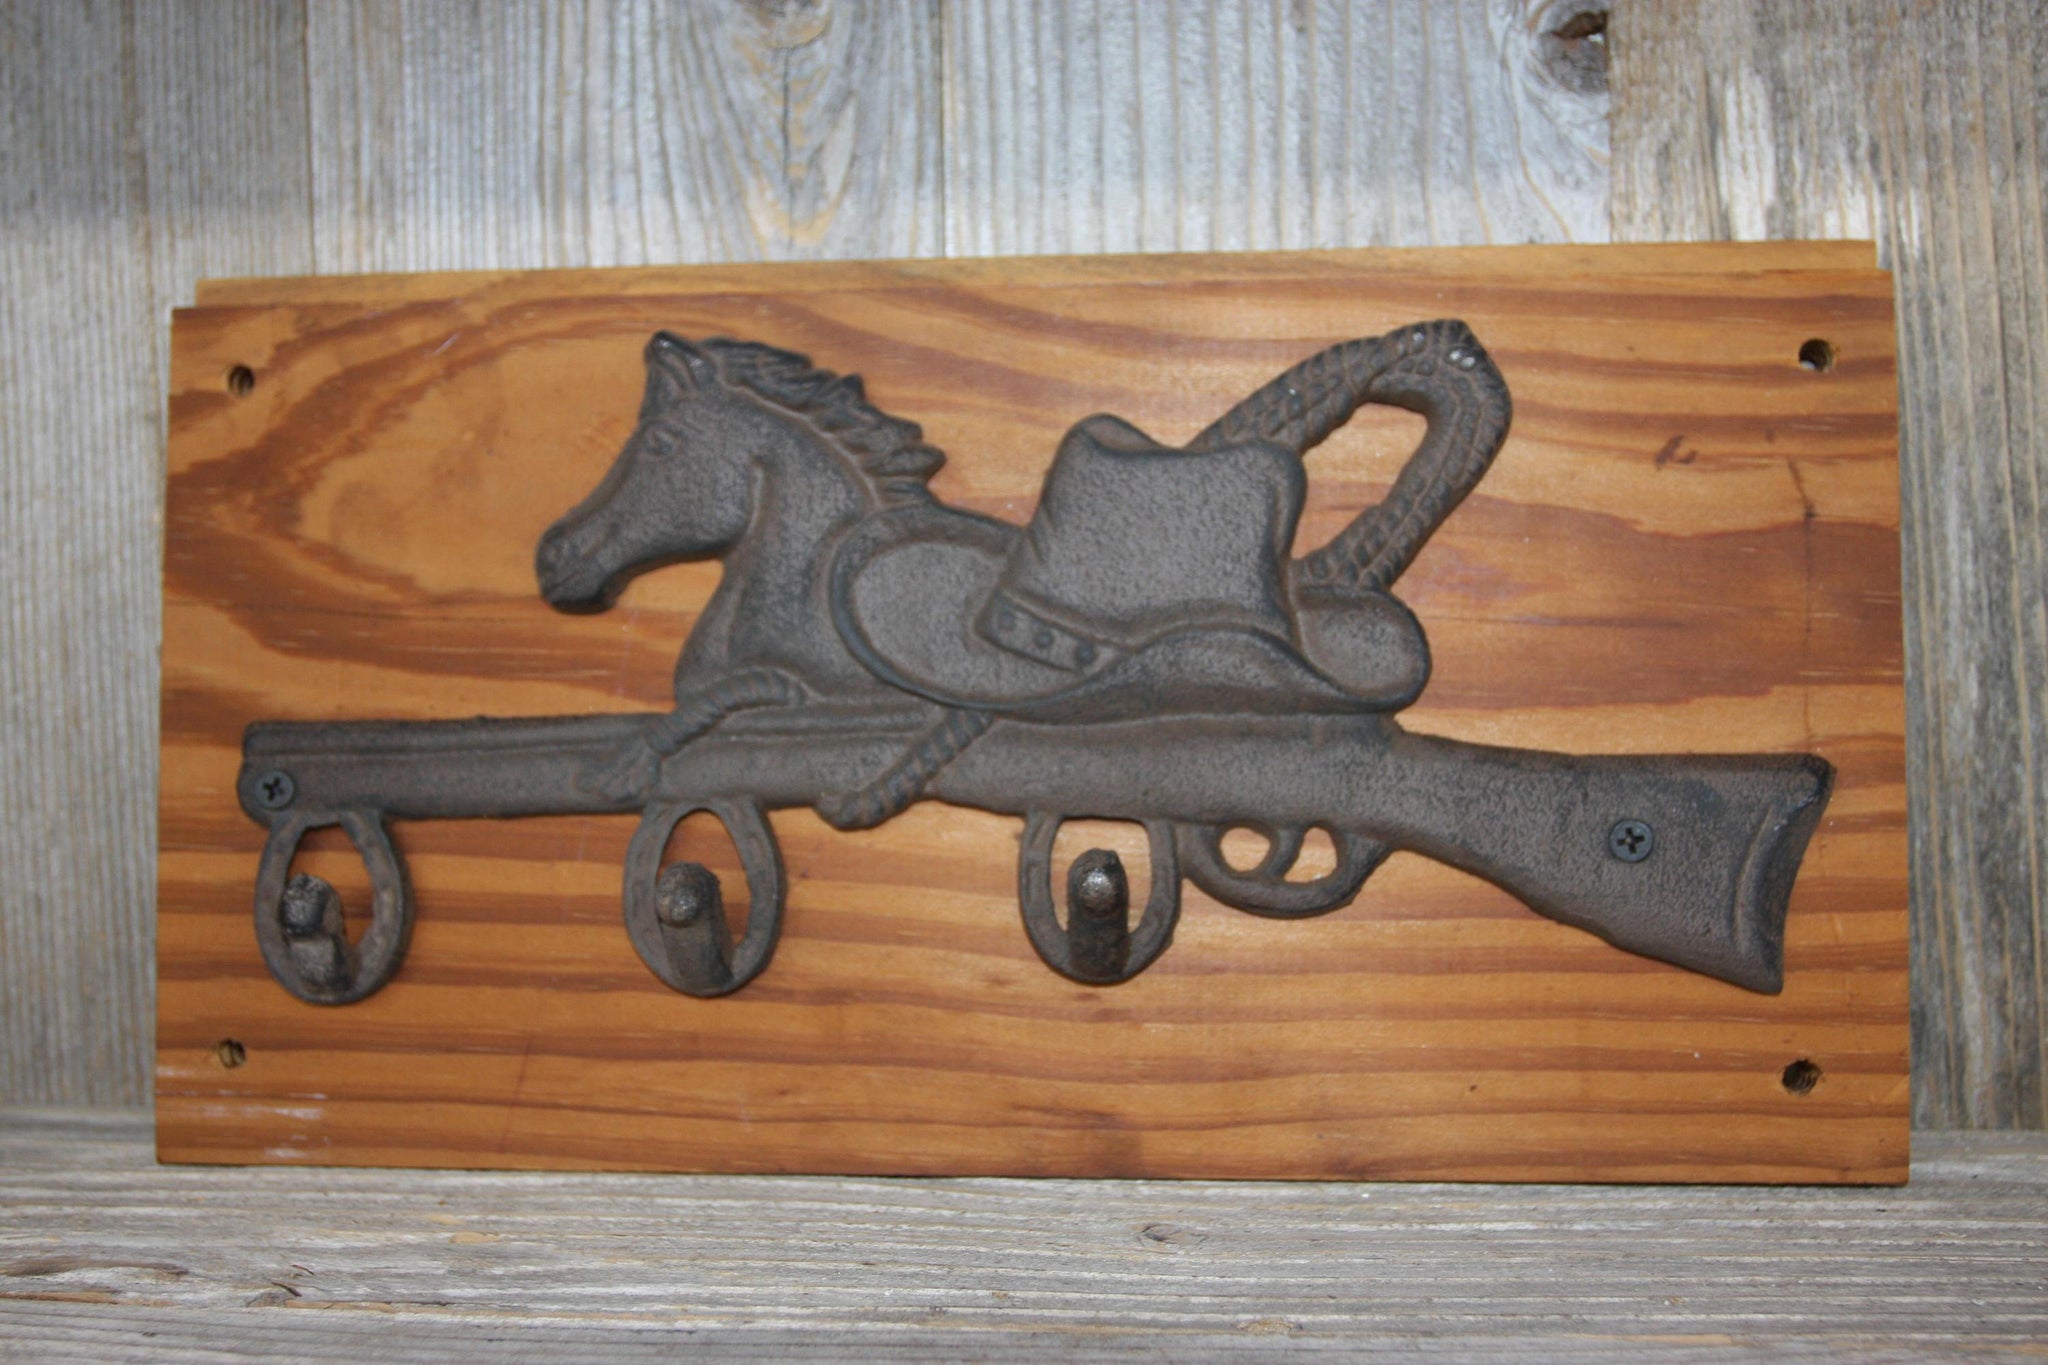 Rustic Cowboy Bath Towel Hook Rack Wall Mounted, Handmade in USA, Cast Iron, Reclaimed 100 Year Old Wood, The Country Hookers, CH-10